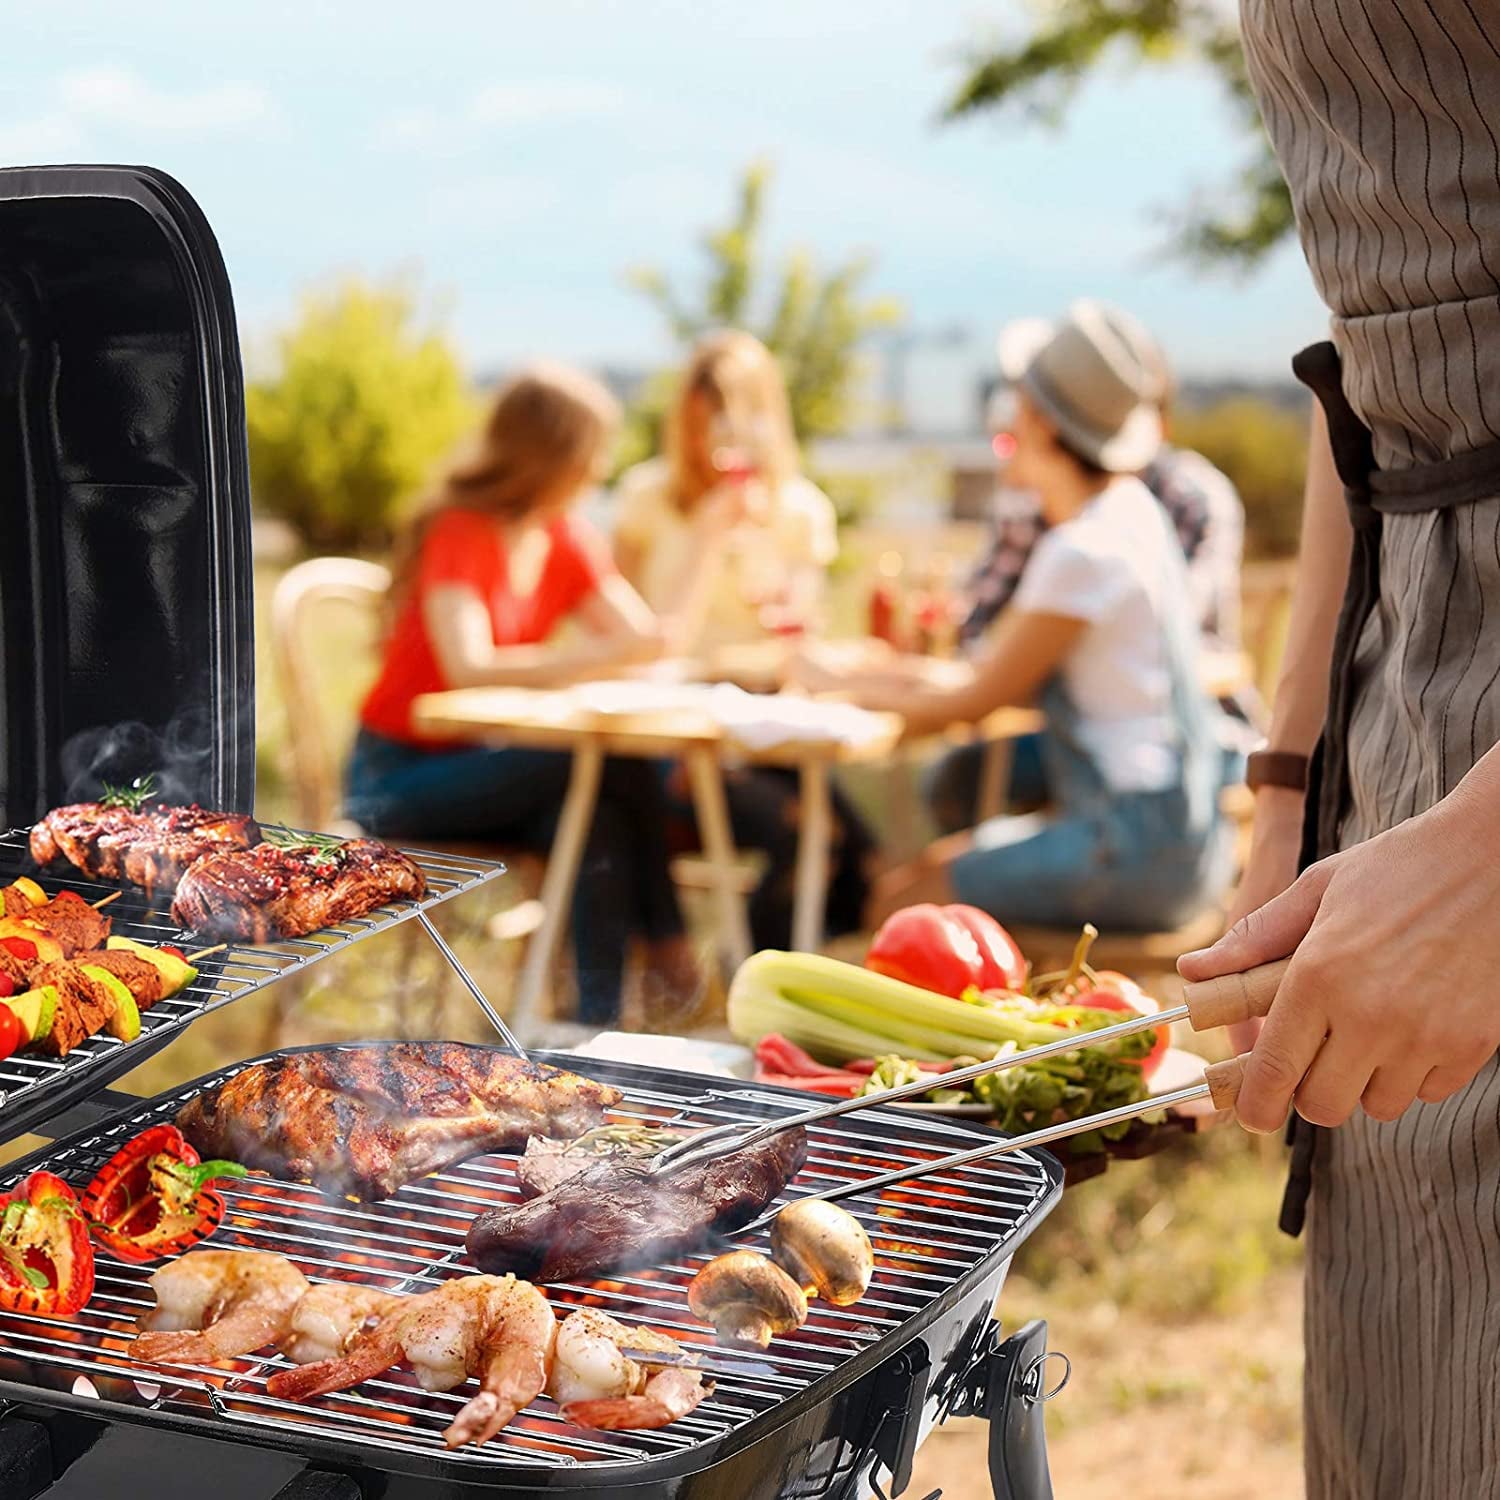 GRILLING TAILGATING PICNIC FOLD-UP TABLE PLANS ONLY 